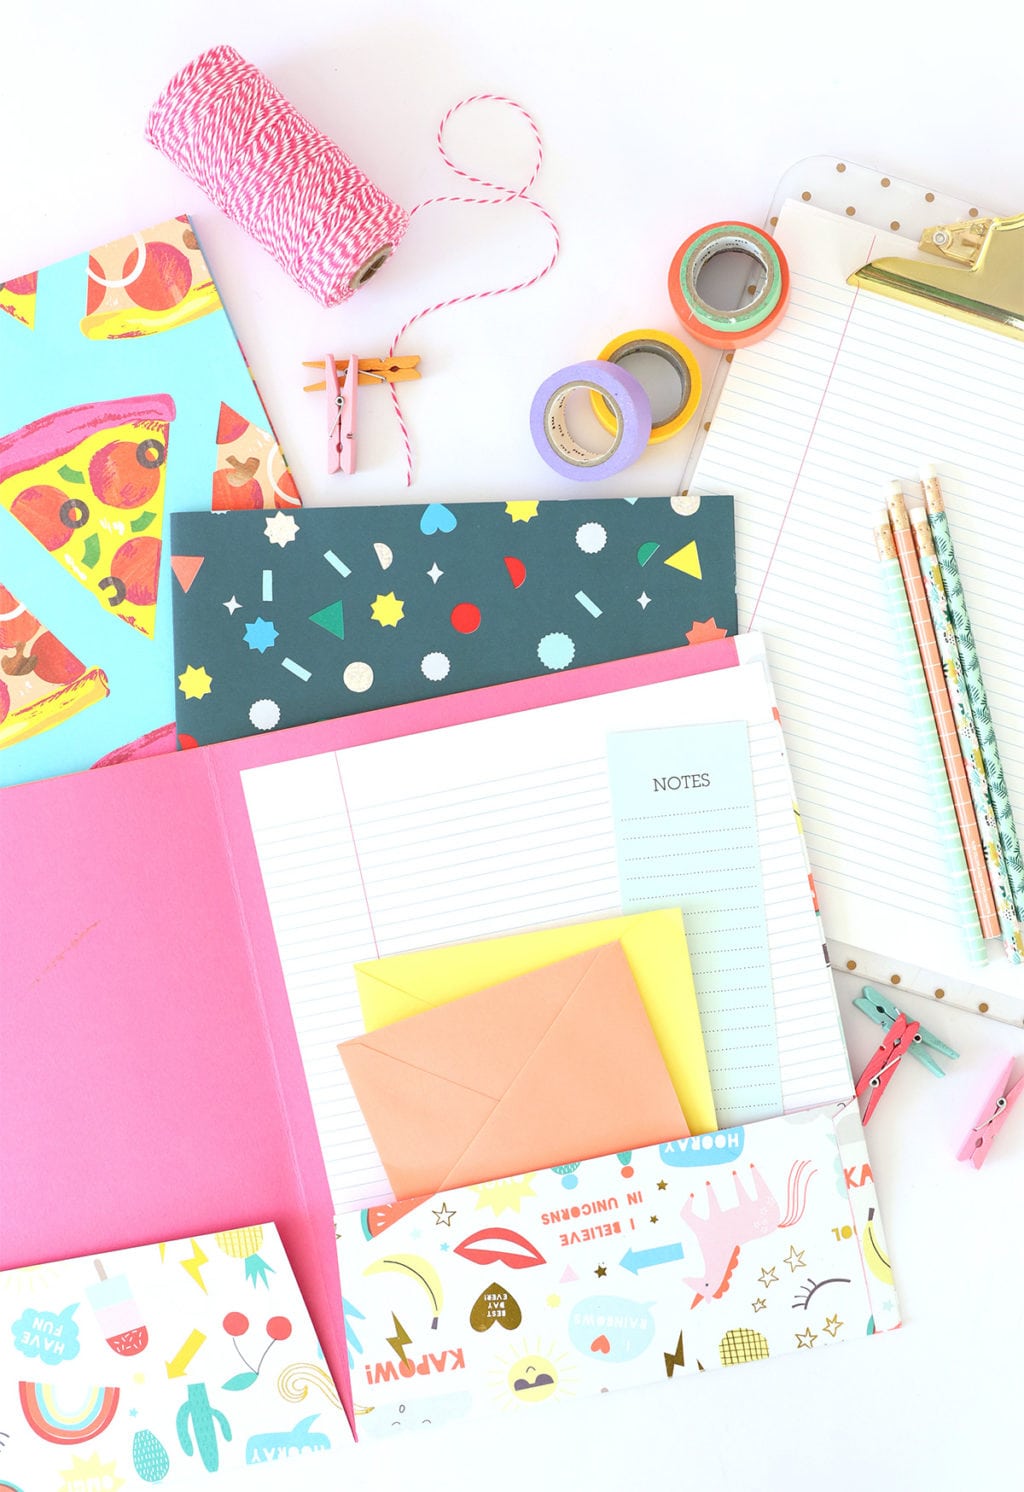 Perfect for students, planners or anyone who wants to get organized!